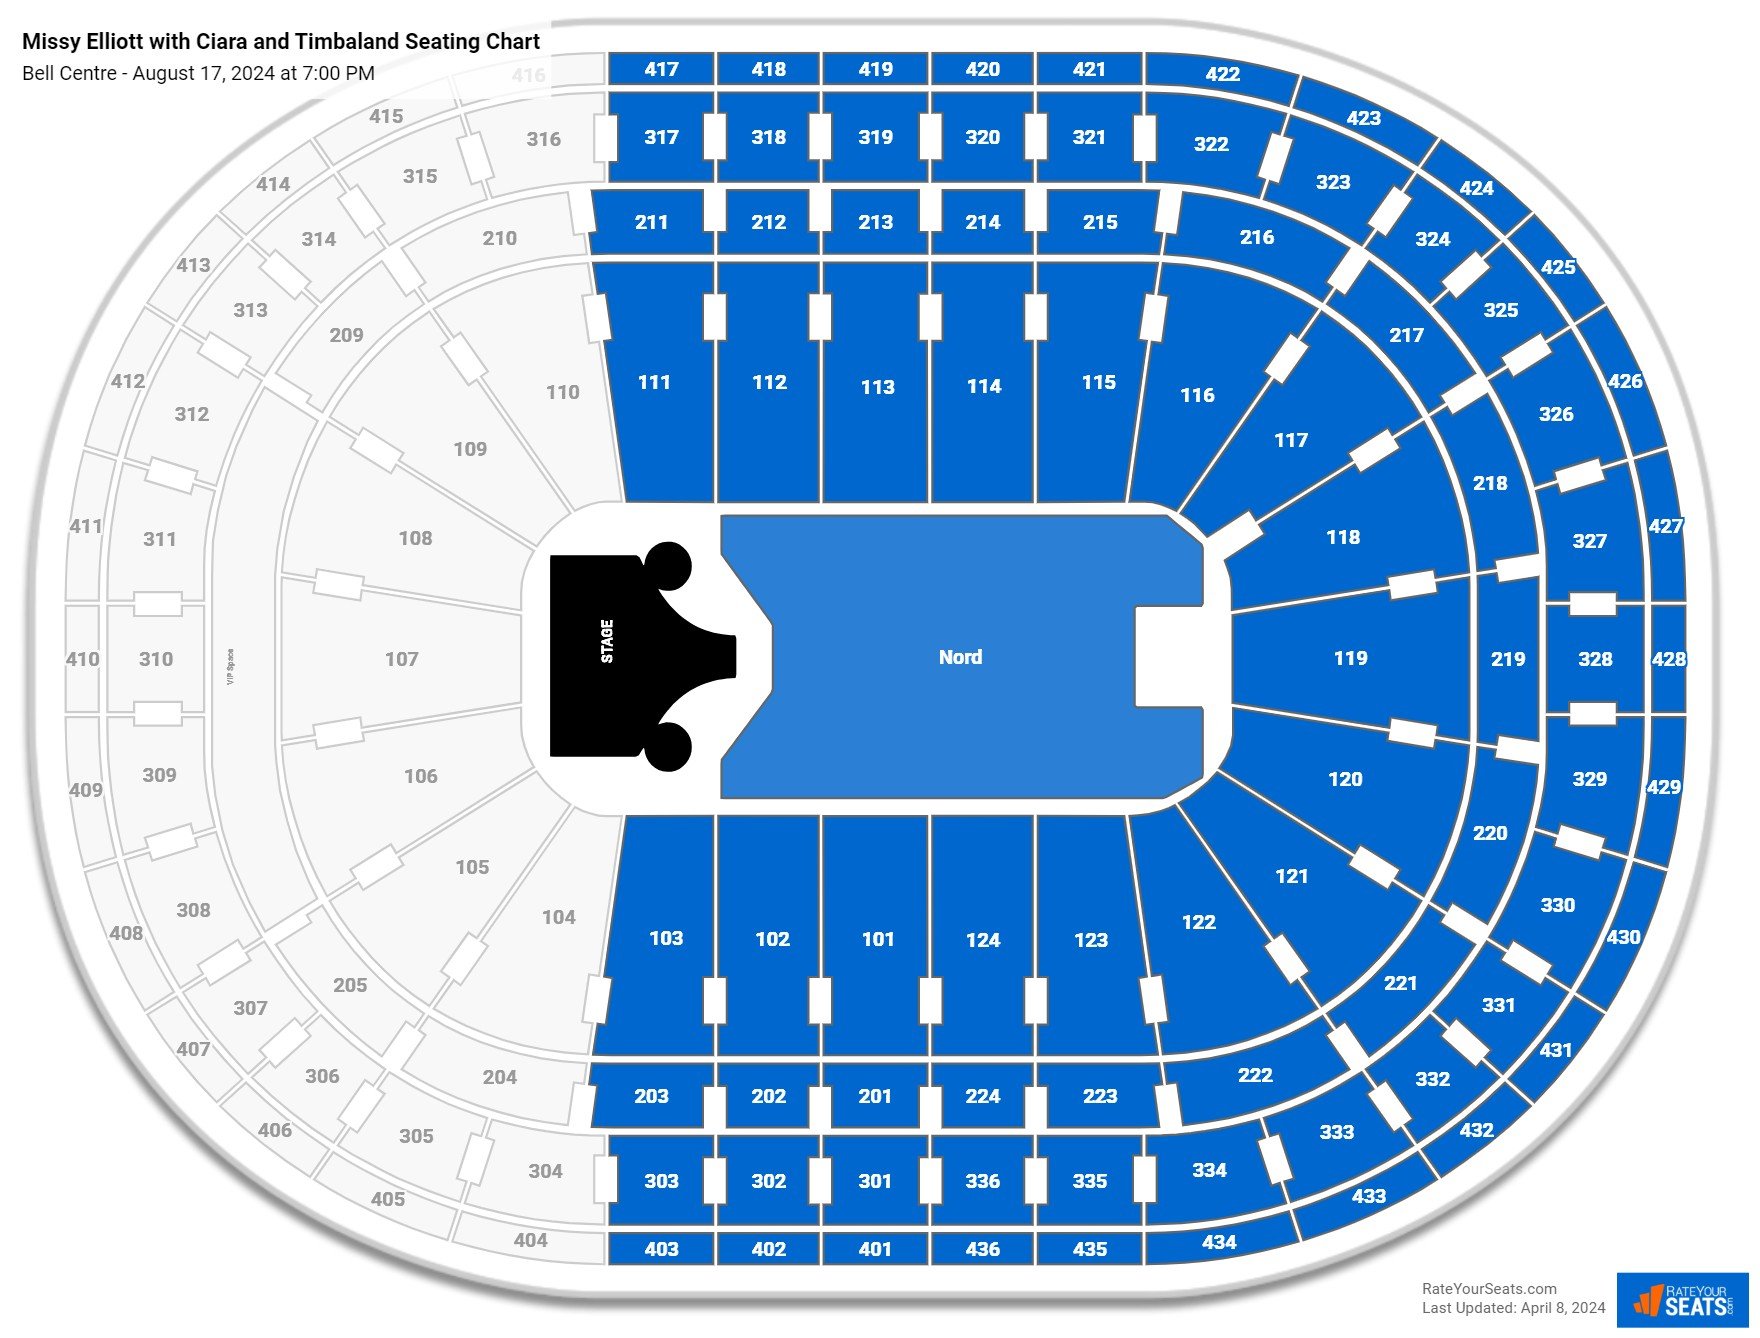 Missy Elliott with Ciara and Timbaland seating chart Bell Centre